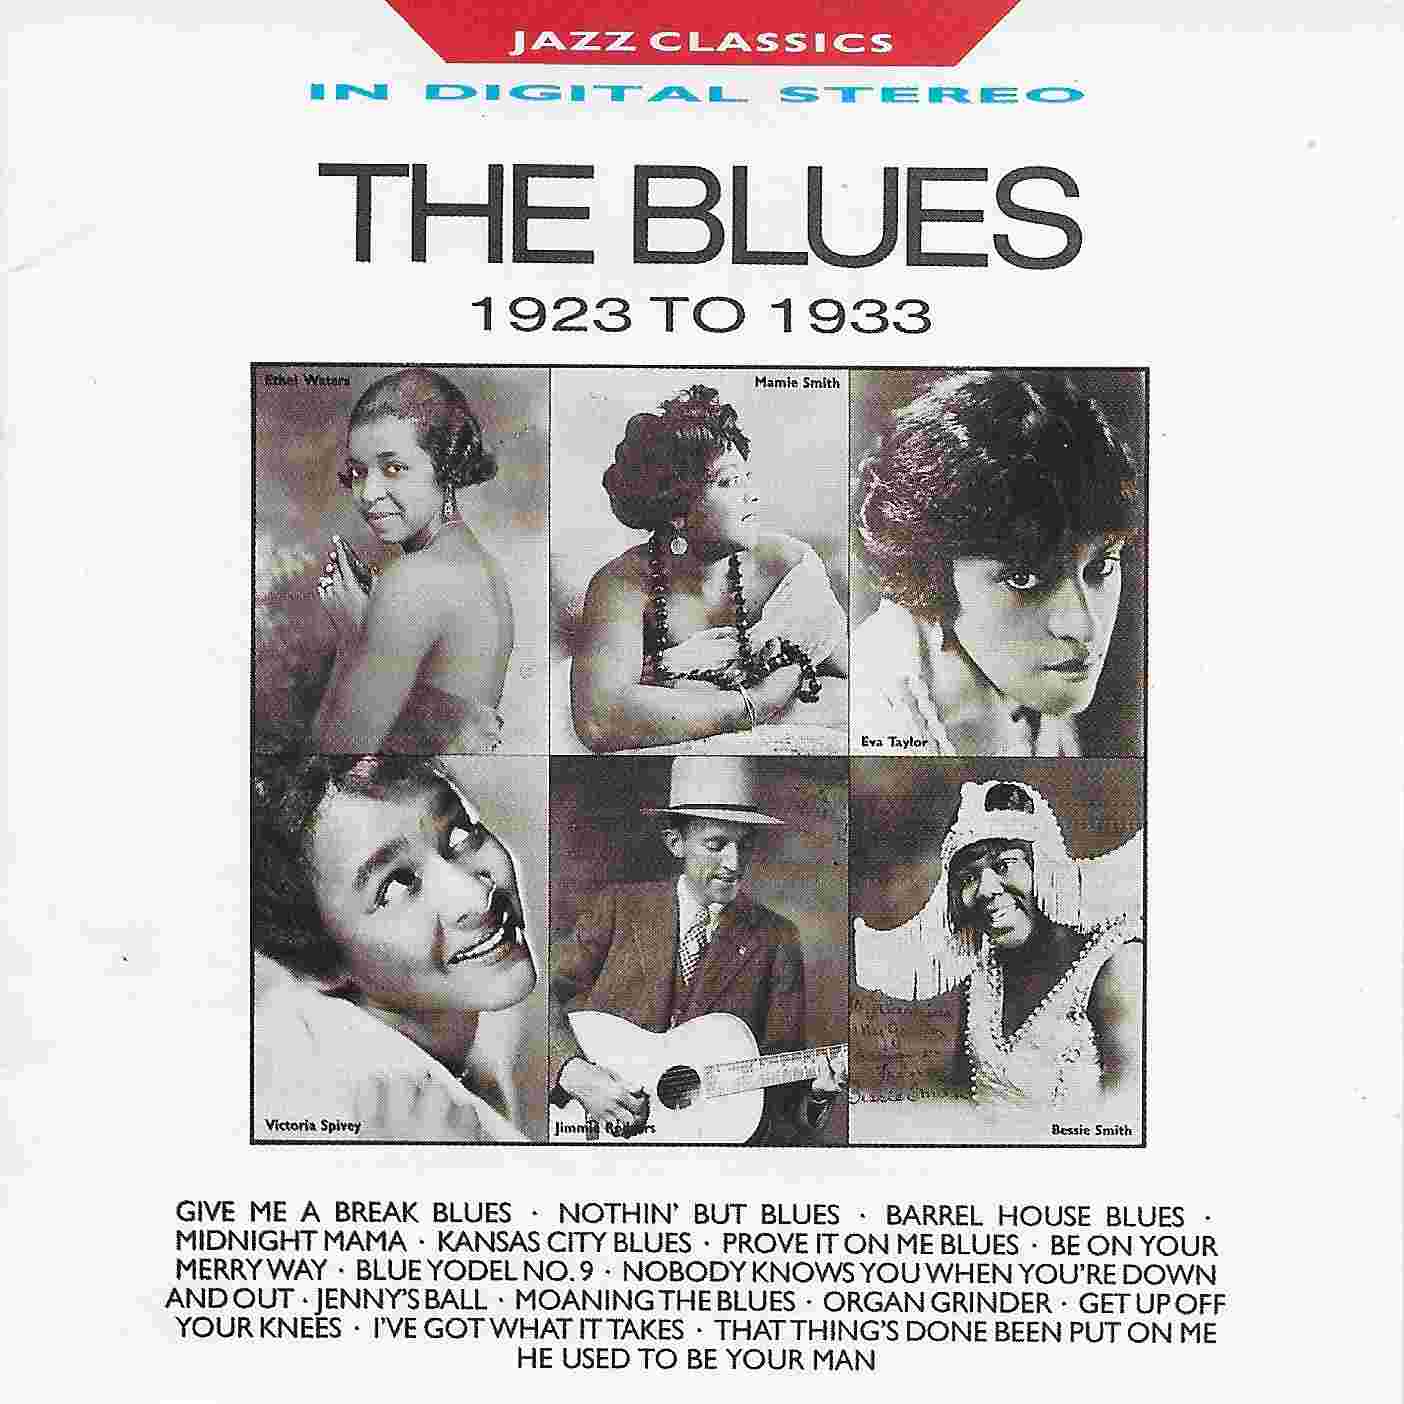 Picture of BBCCD683 Jazz classics - The blues 1923 - 1933 by artist Various from the BBC cds - Records and Tapes library